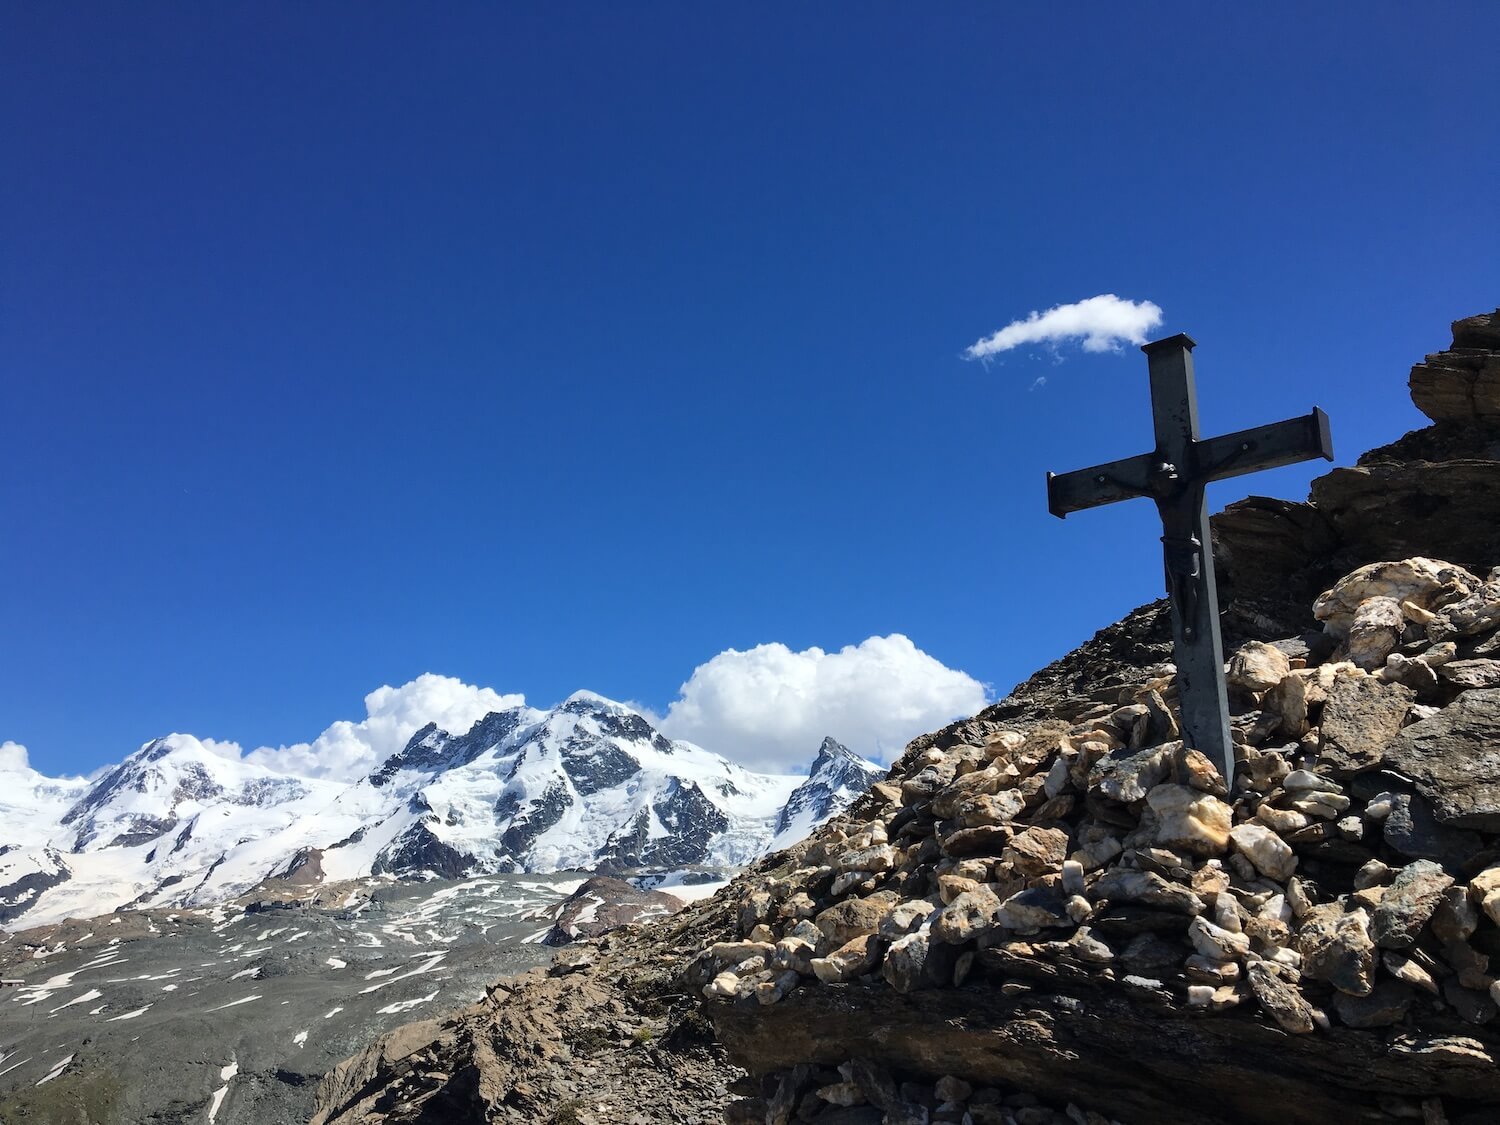  On the way to Hörnli Hut with views of the Monte Rosa massif in the background. 